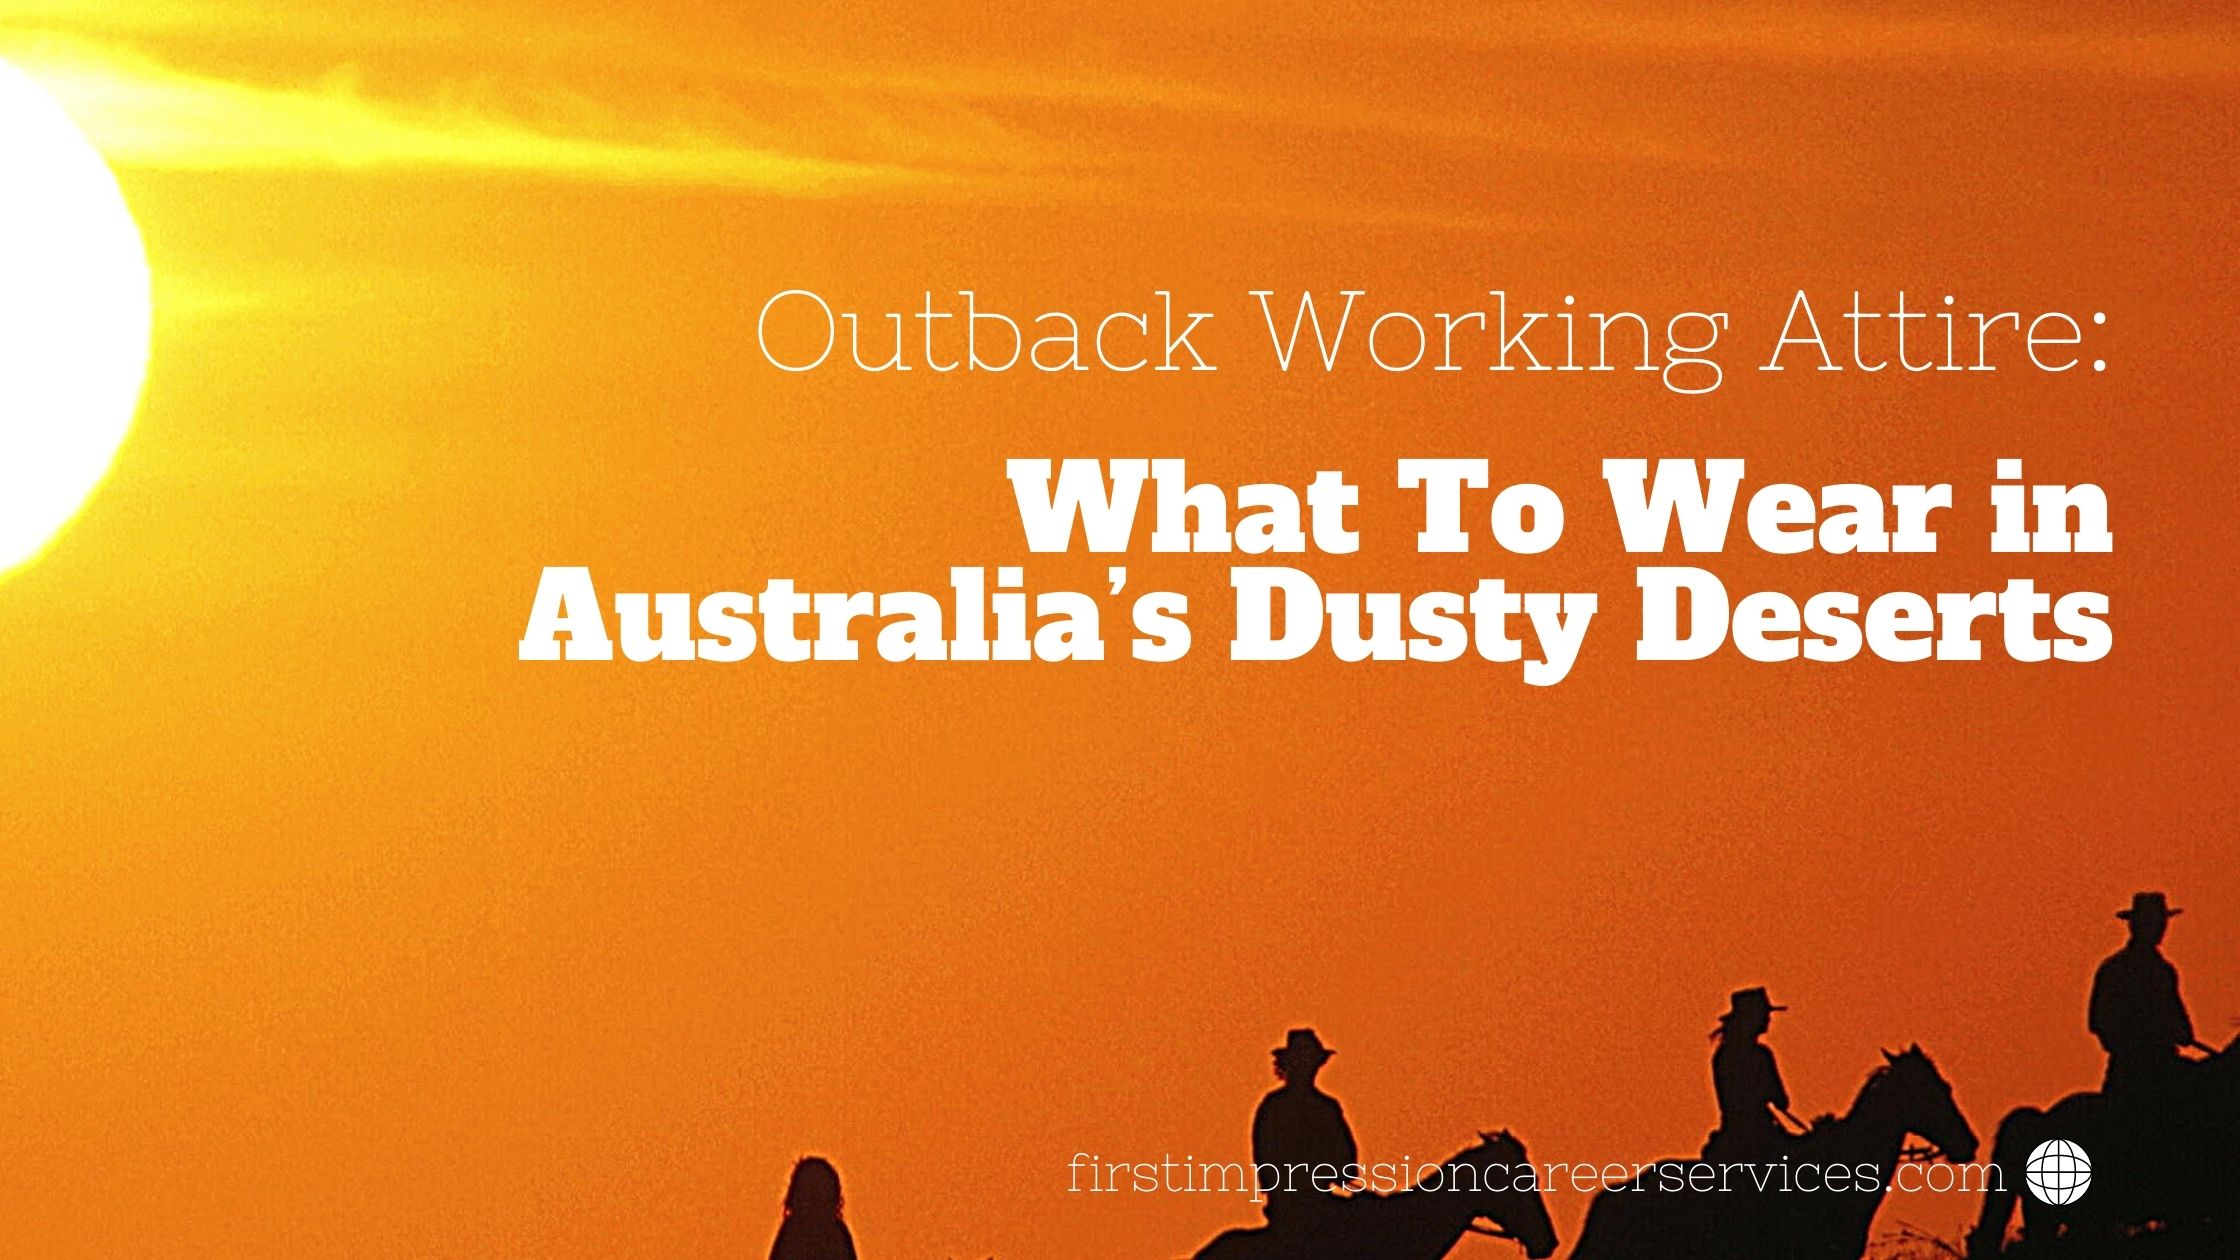 Outback-Working-Attire-What-To-Wear-in-Australias-Dusty-Deserts